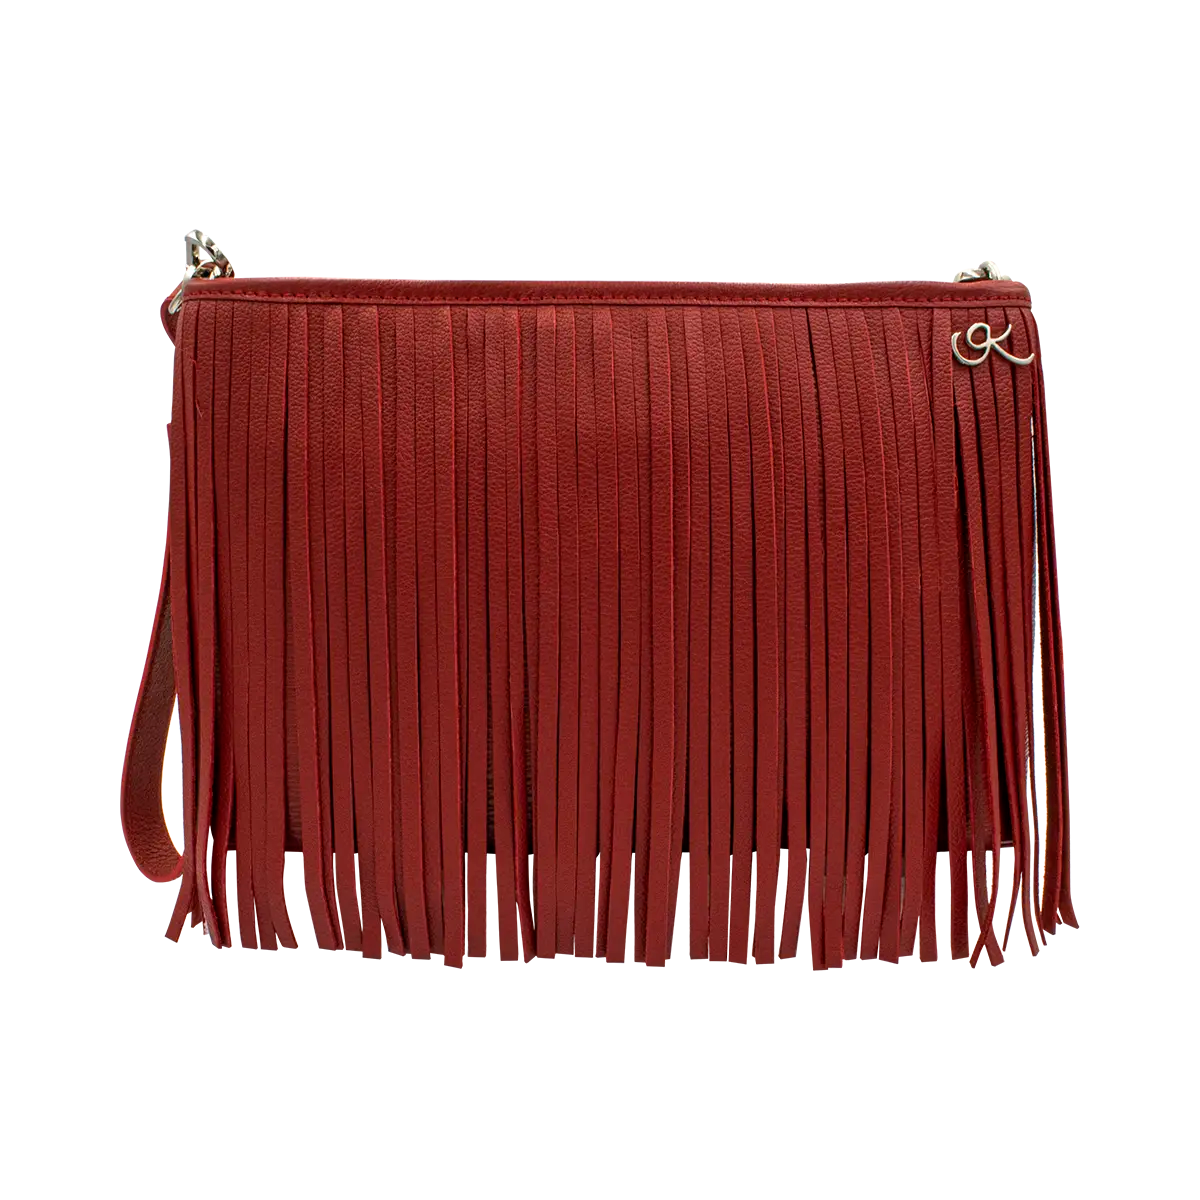 red small black leather crossbody bag with fringe. Fashion accessory for women in San Diego, CA.